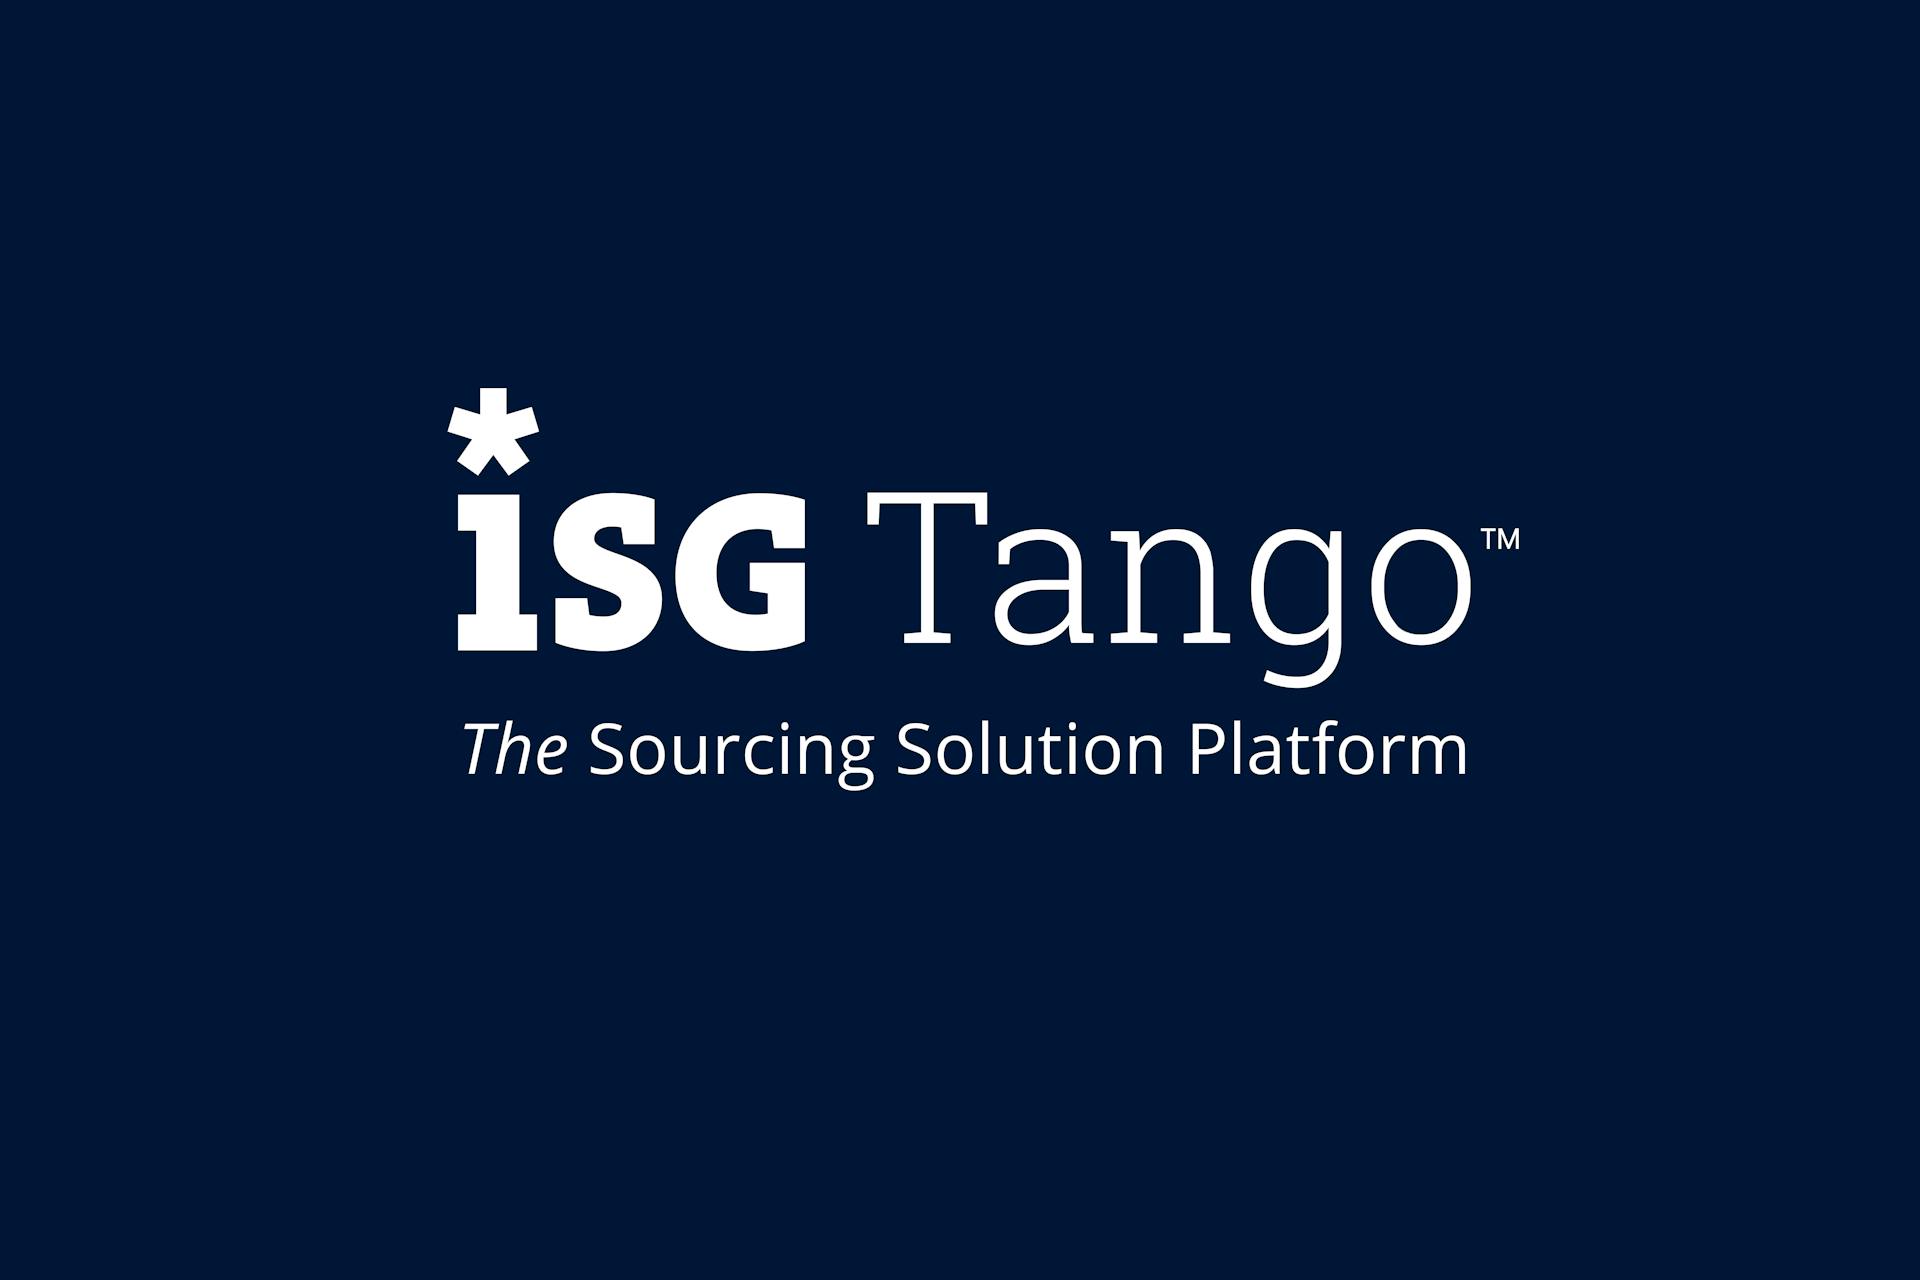 White text on a dark blue background reads "iSG Tango, The Sourcing Solution Platform"